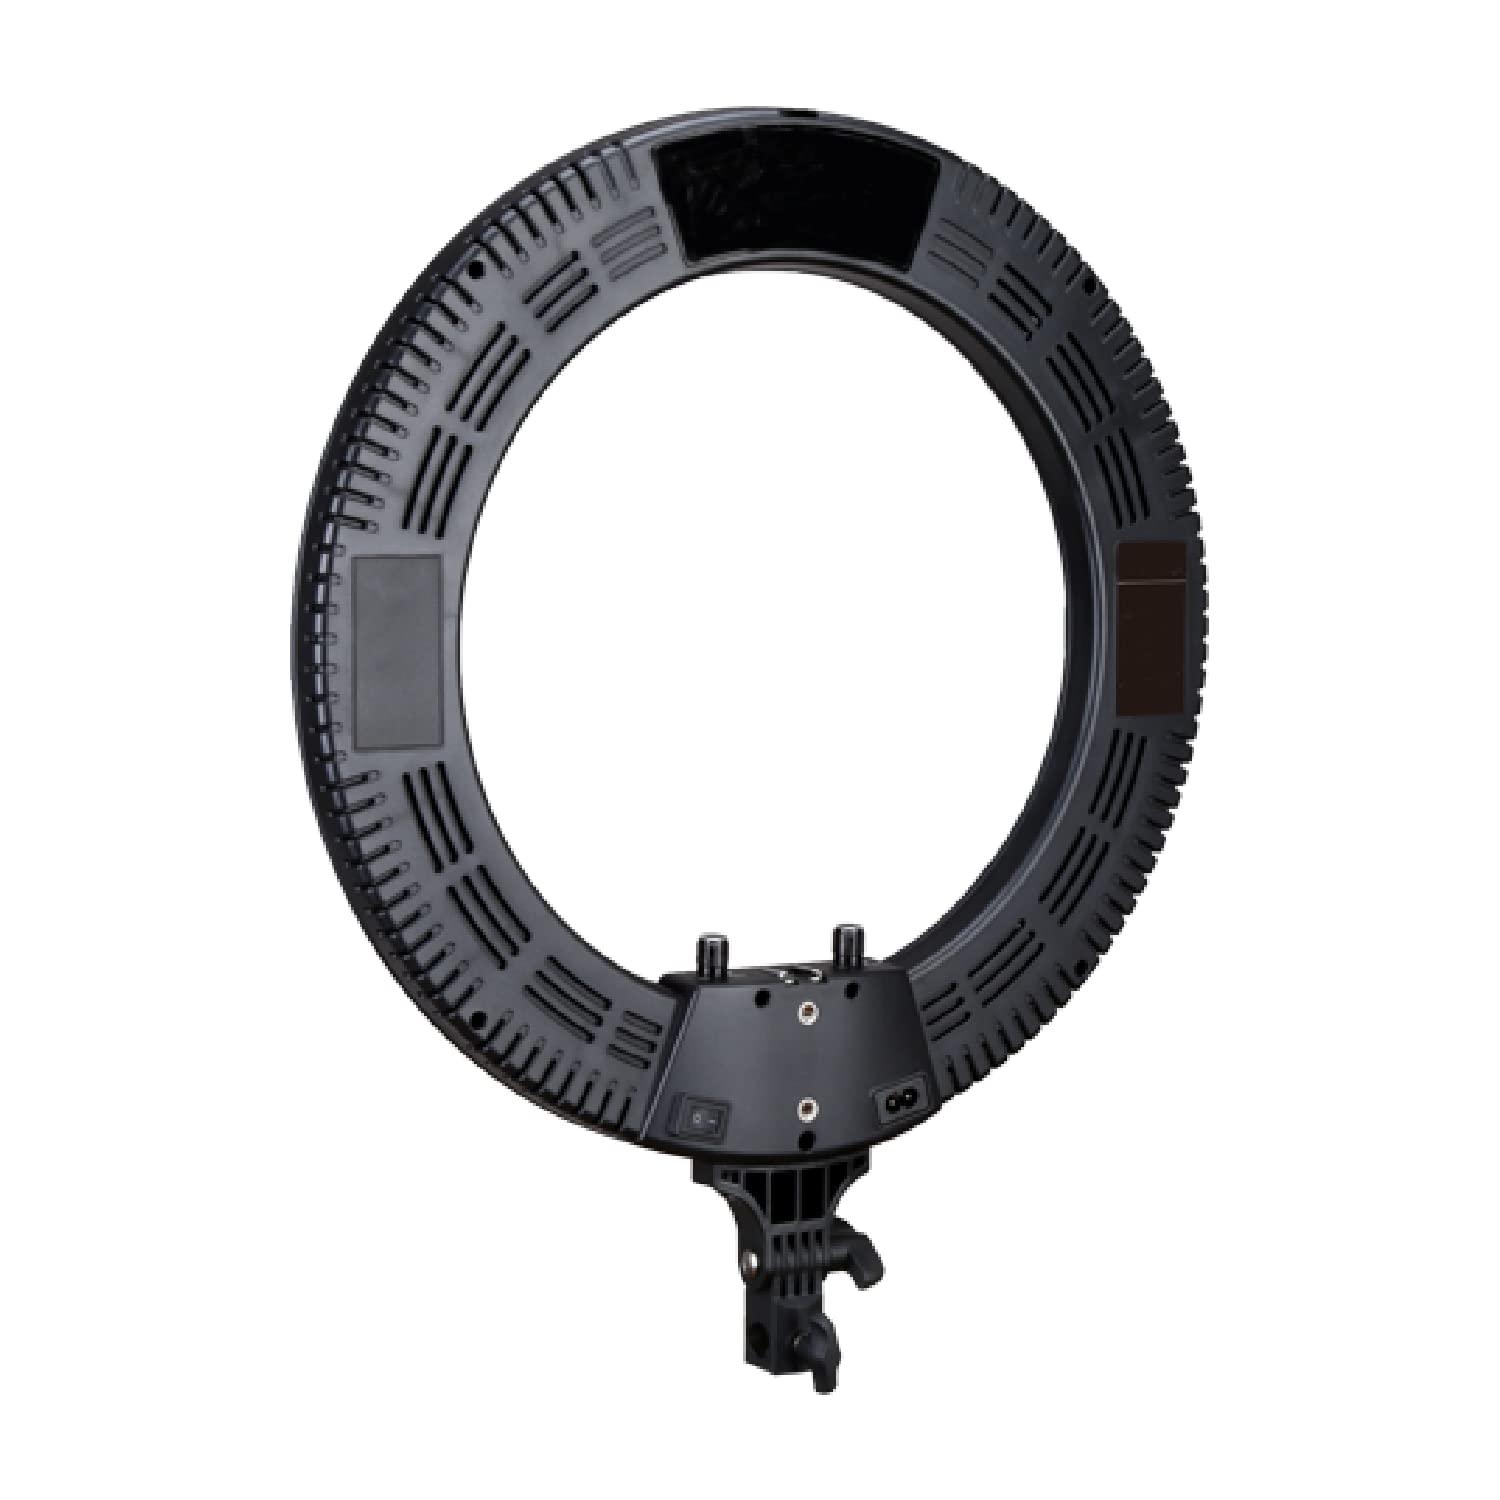 Digitek (DPRL-18) Platinum (Brighter than Normal) Professional Big LED Ring Light 46cm (18inch) with Powerful 432 Pcs SMD LED & 2 Color Temperature for YouTube Streaming, Photo Video shoot, Makeup & more - Digitek